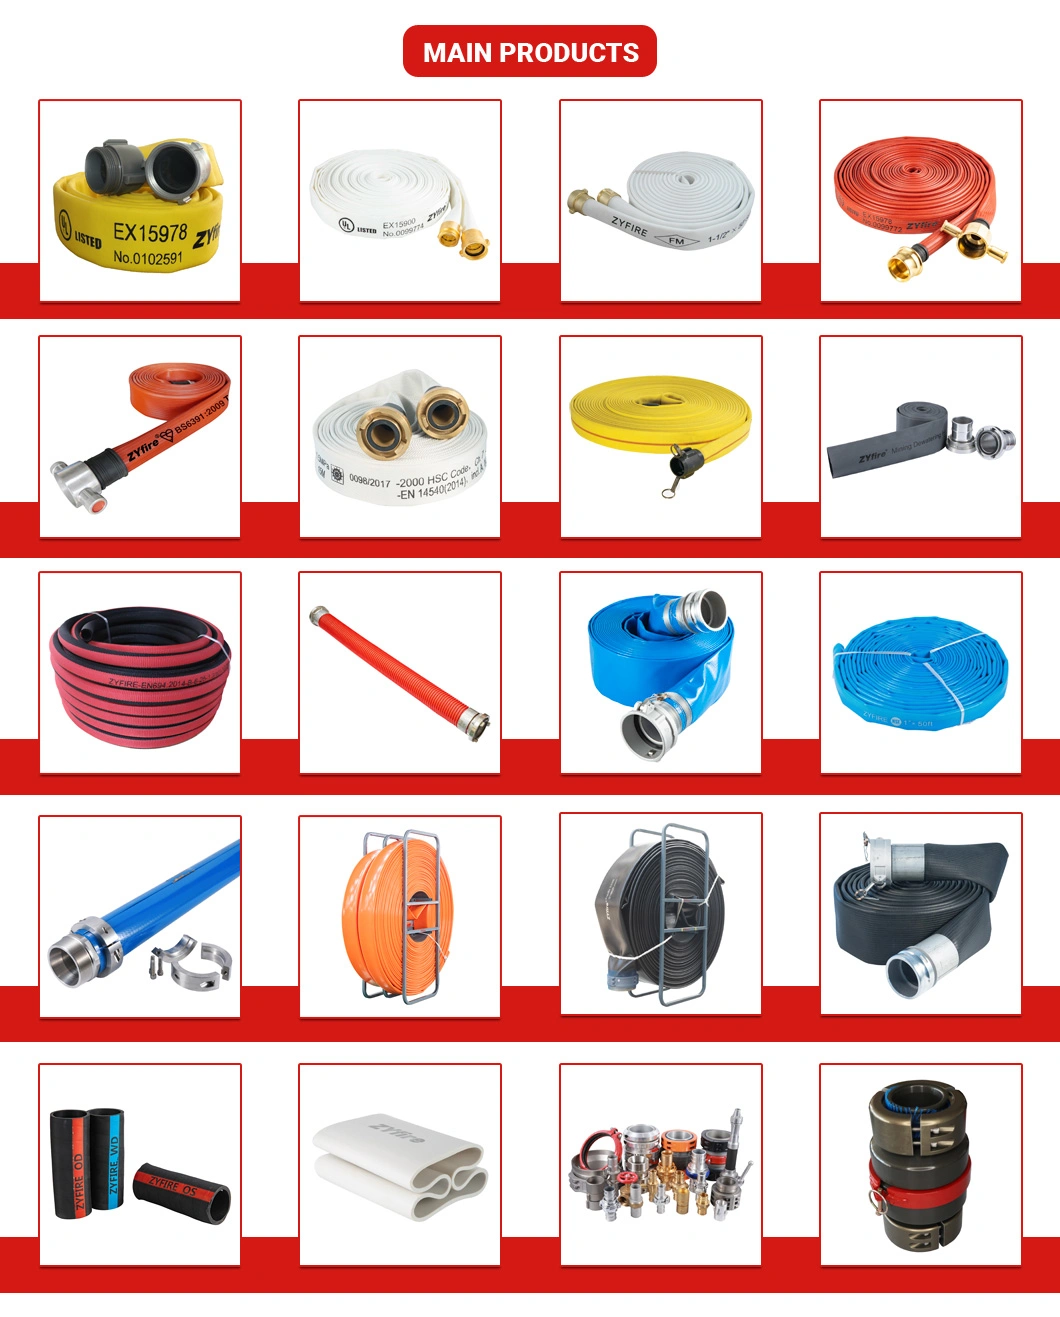 Hot Selling High Performance Water Monitor Potter Switch Deluge Head Fire Fighting Sprinkler